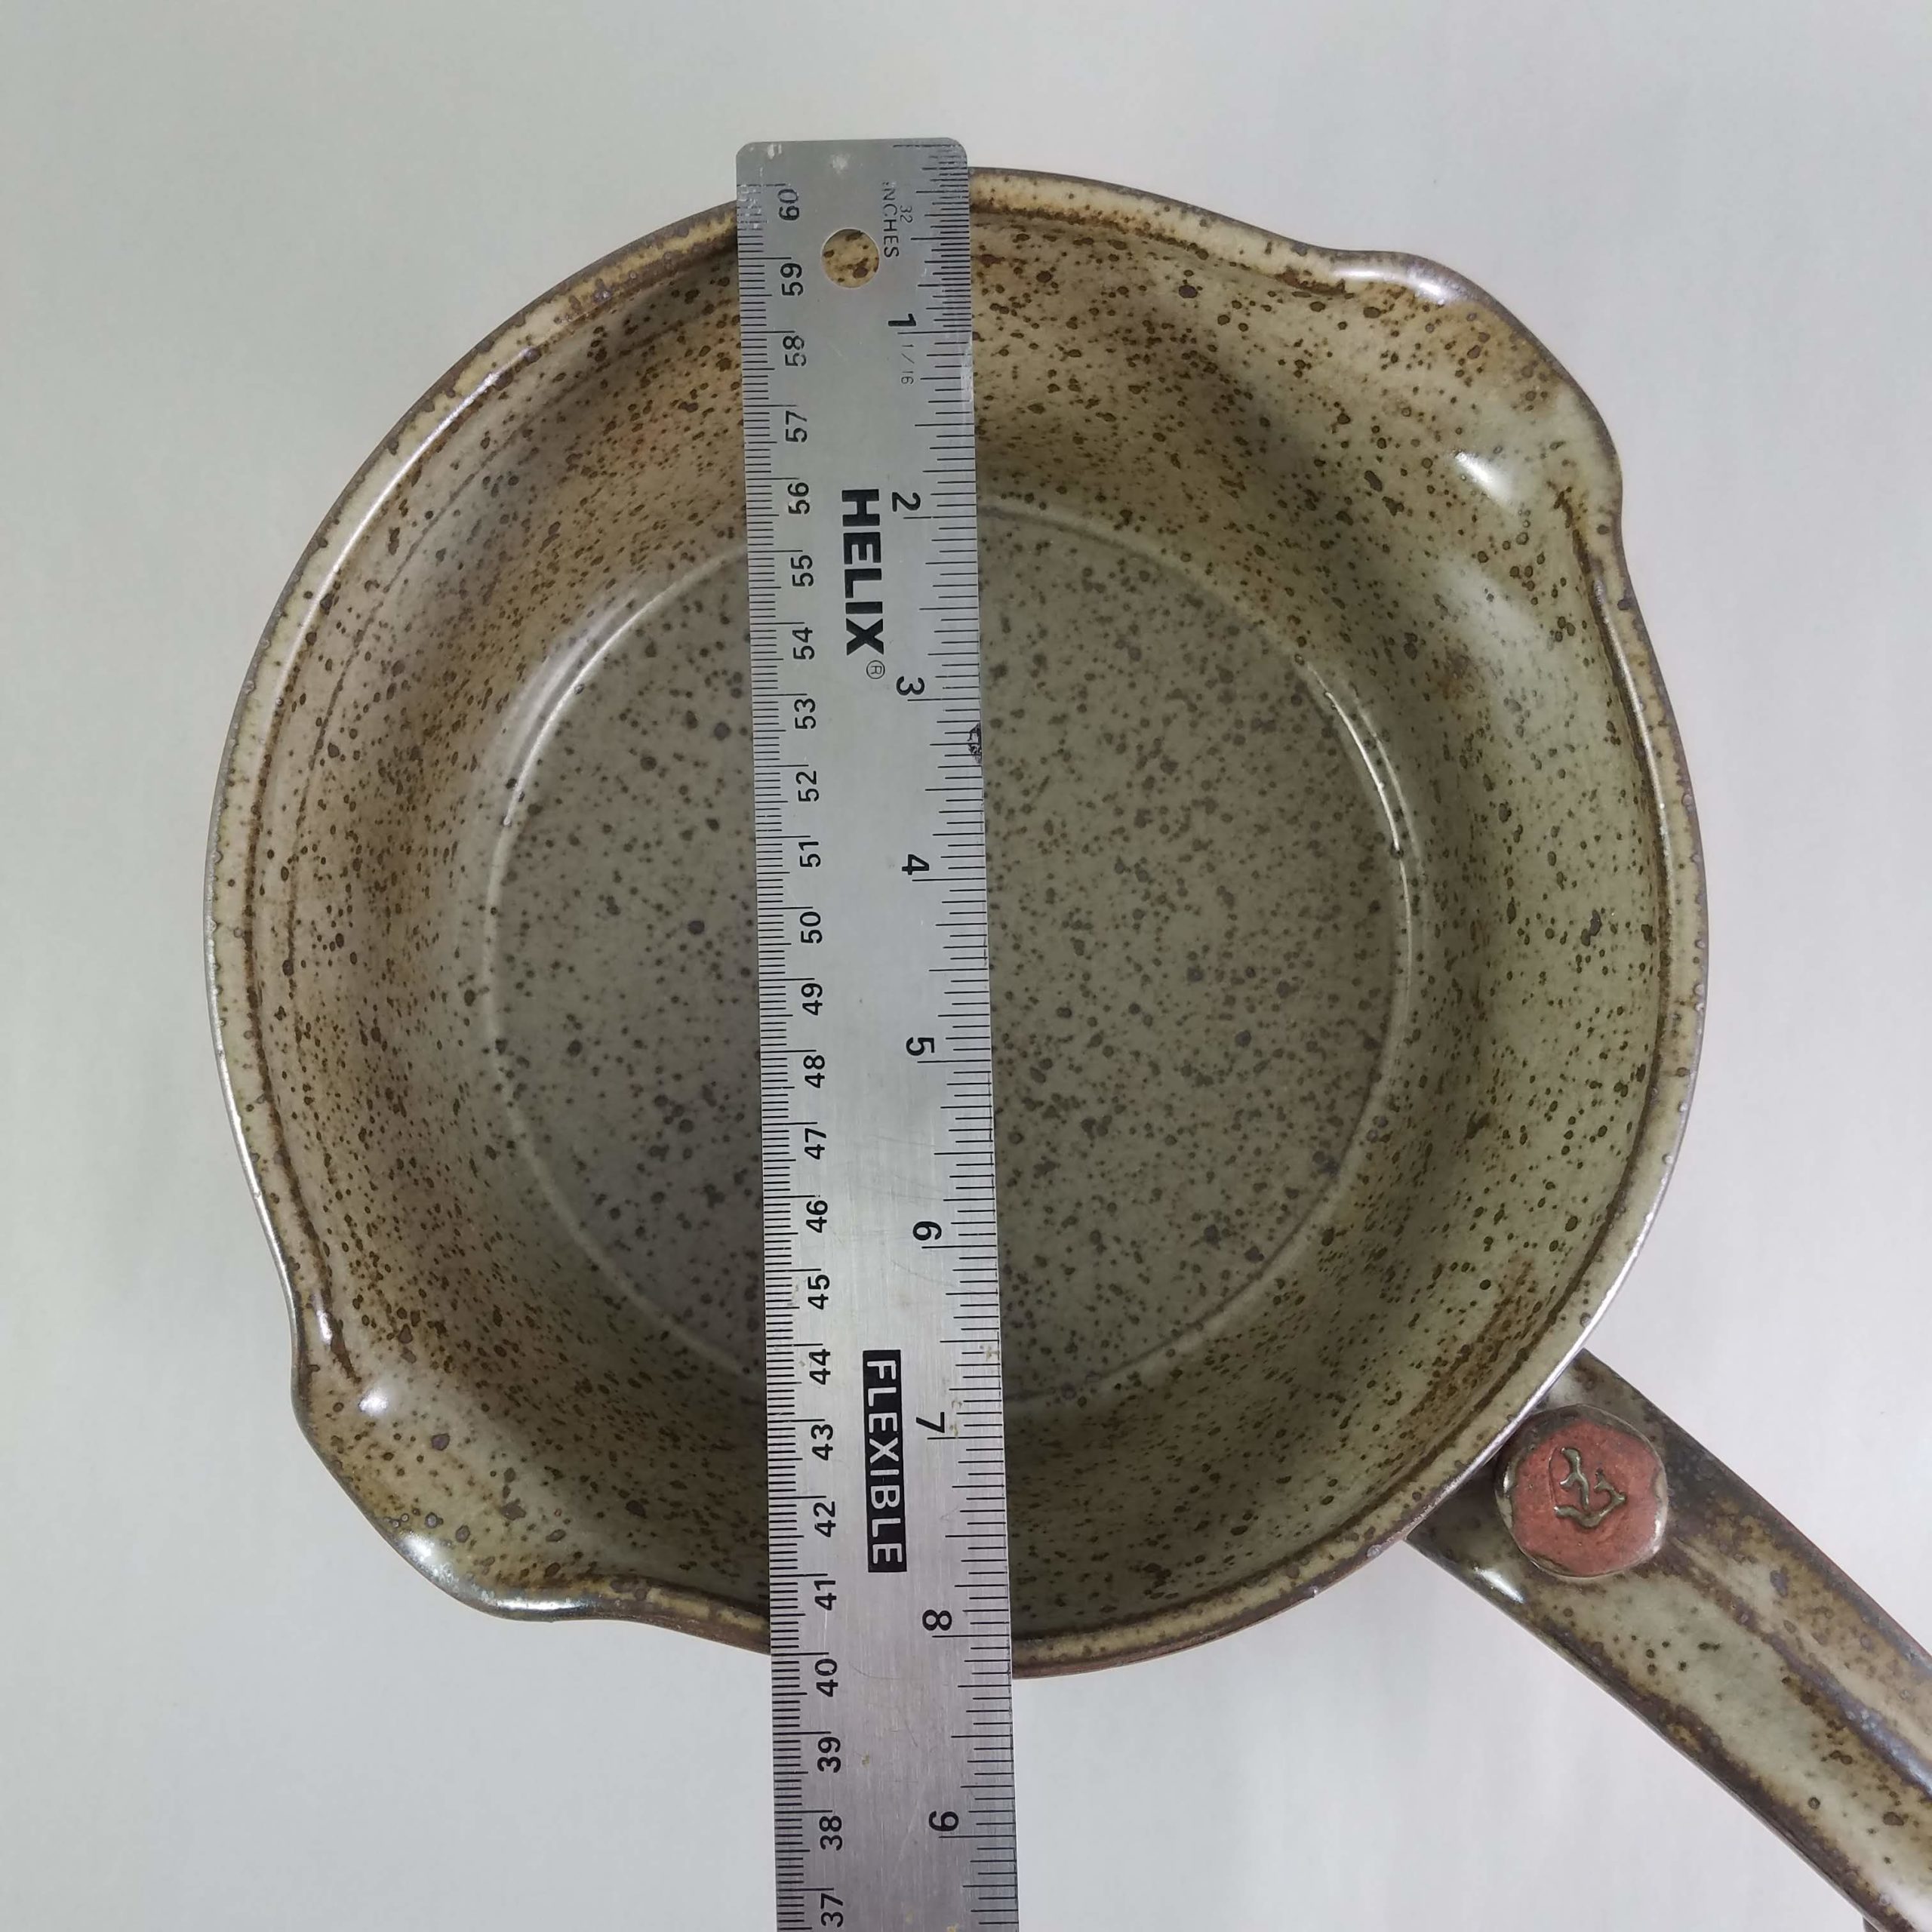 Clay Coyote Flameware Large Skillet for Frying or Searing